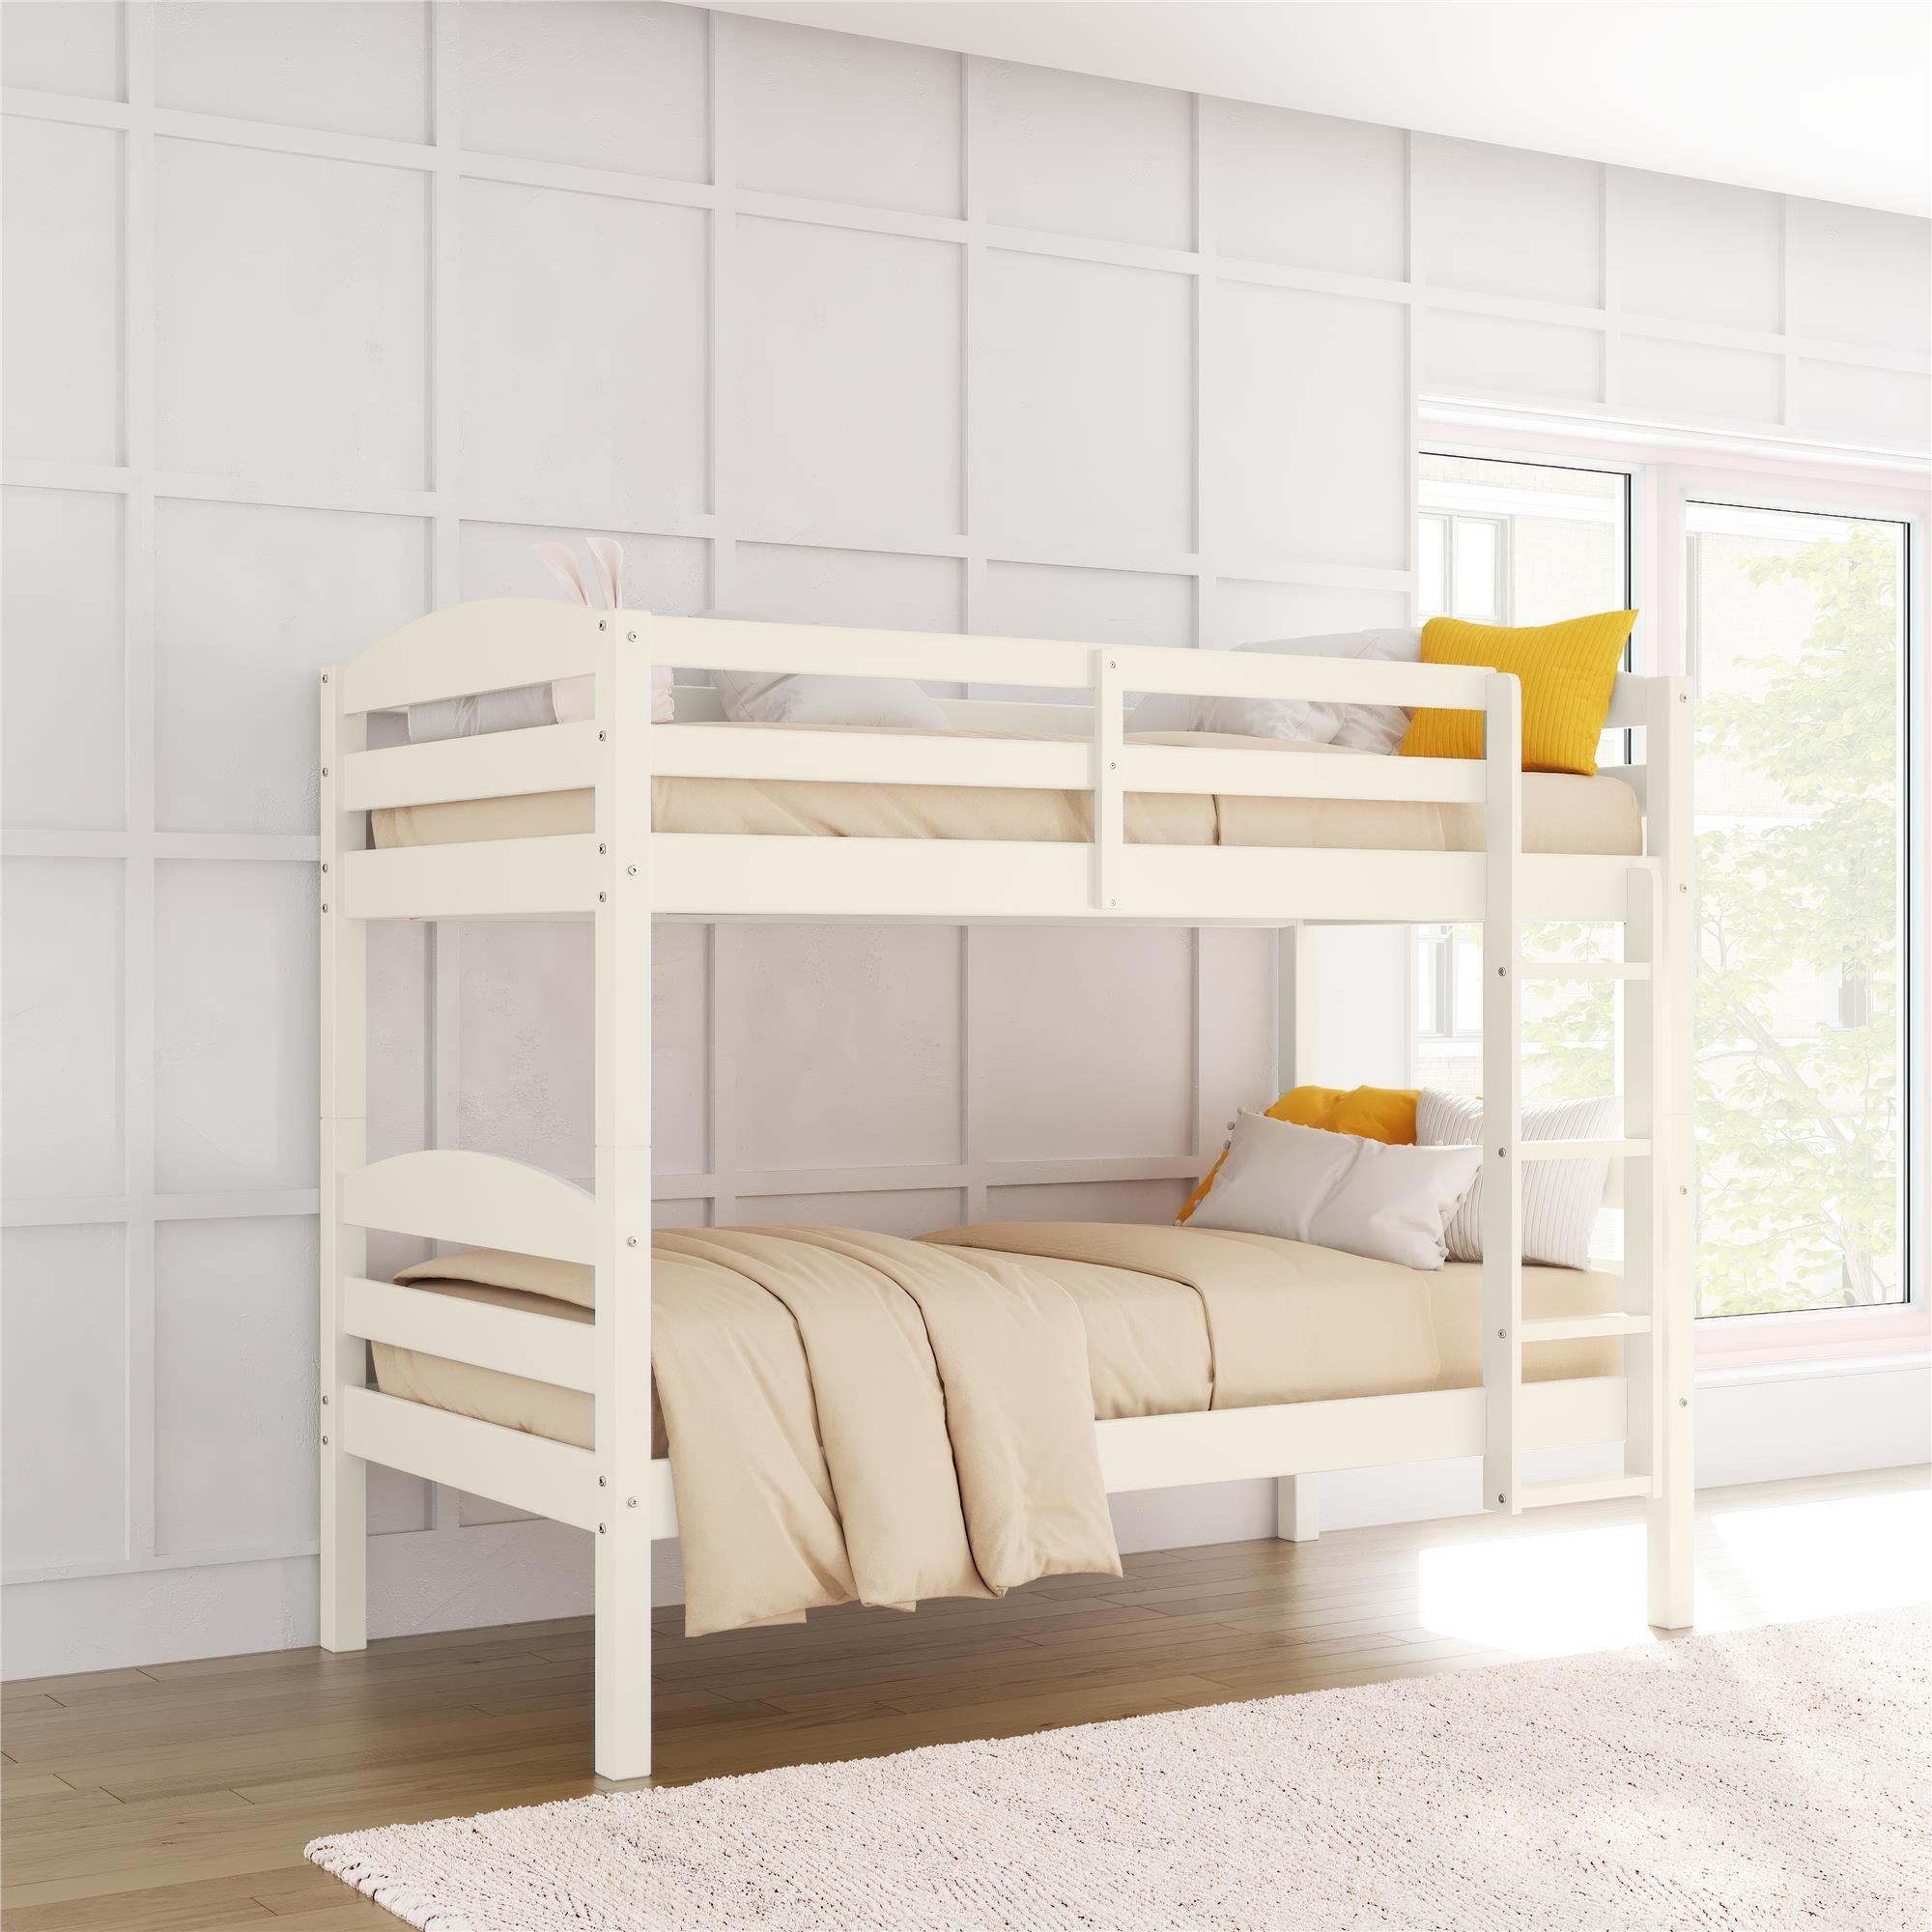 Better Homes & Gardens Leighton Solid Wood Twin-over-Twin Convertible Bunk Bed, White - image 4 of 24